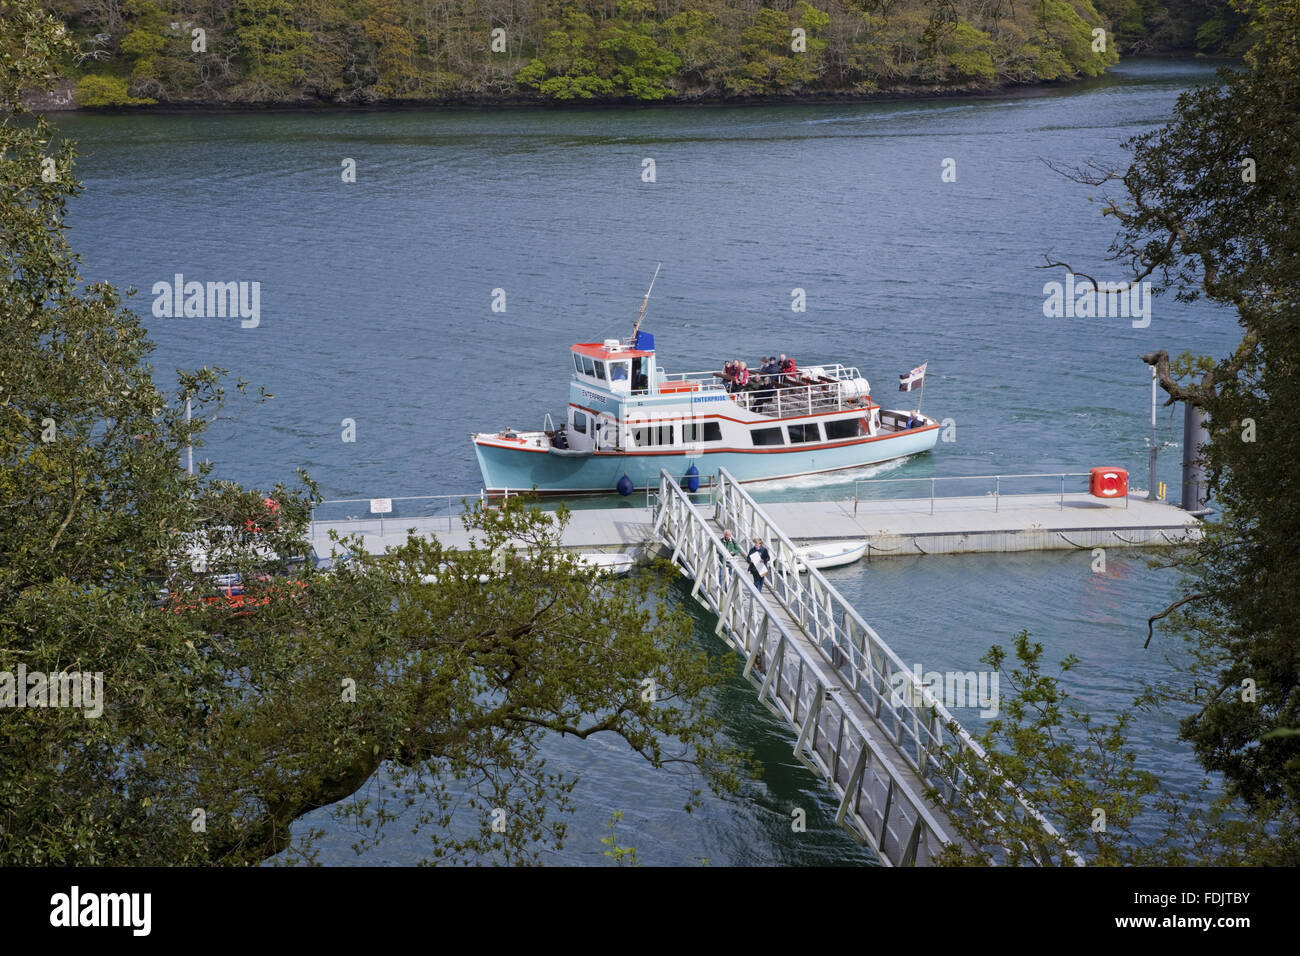 The Foot Ferry on the River Fal which brings visitors to the landing stage at Trelissick Garden, Cornwall. Stock Photo